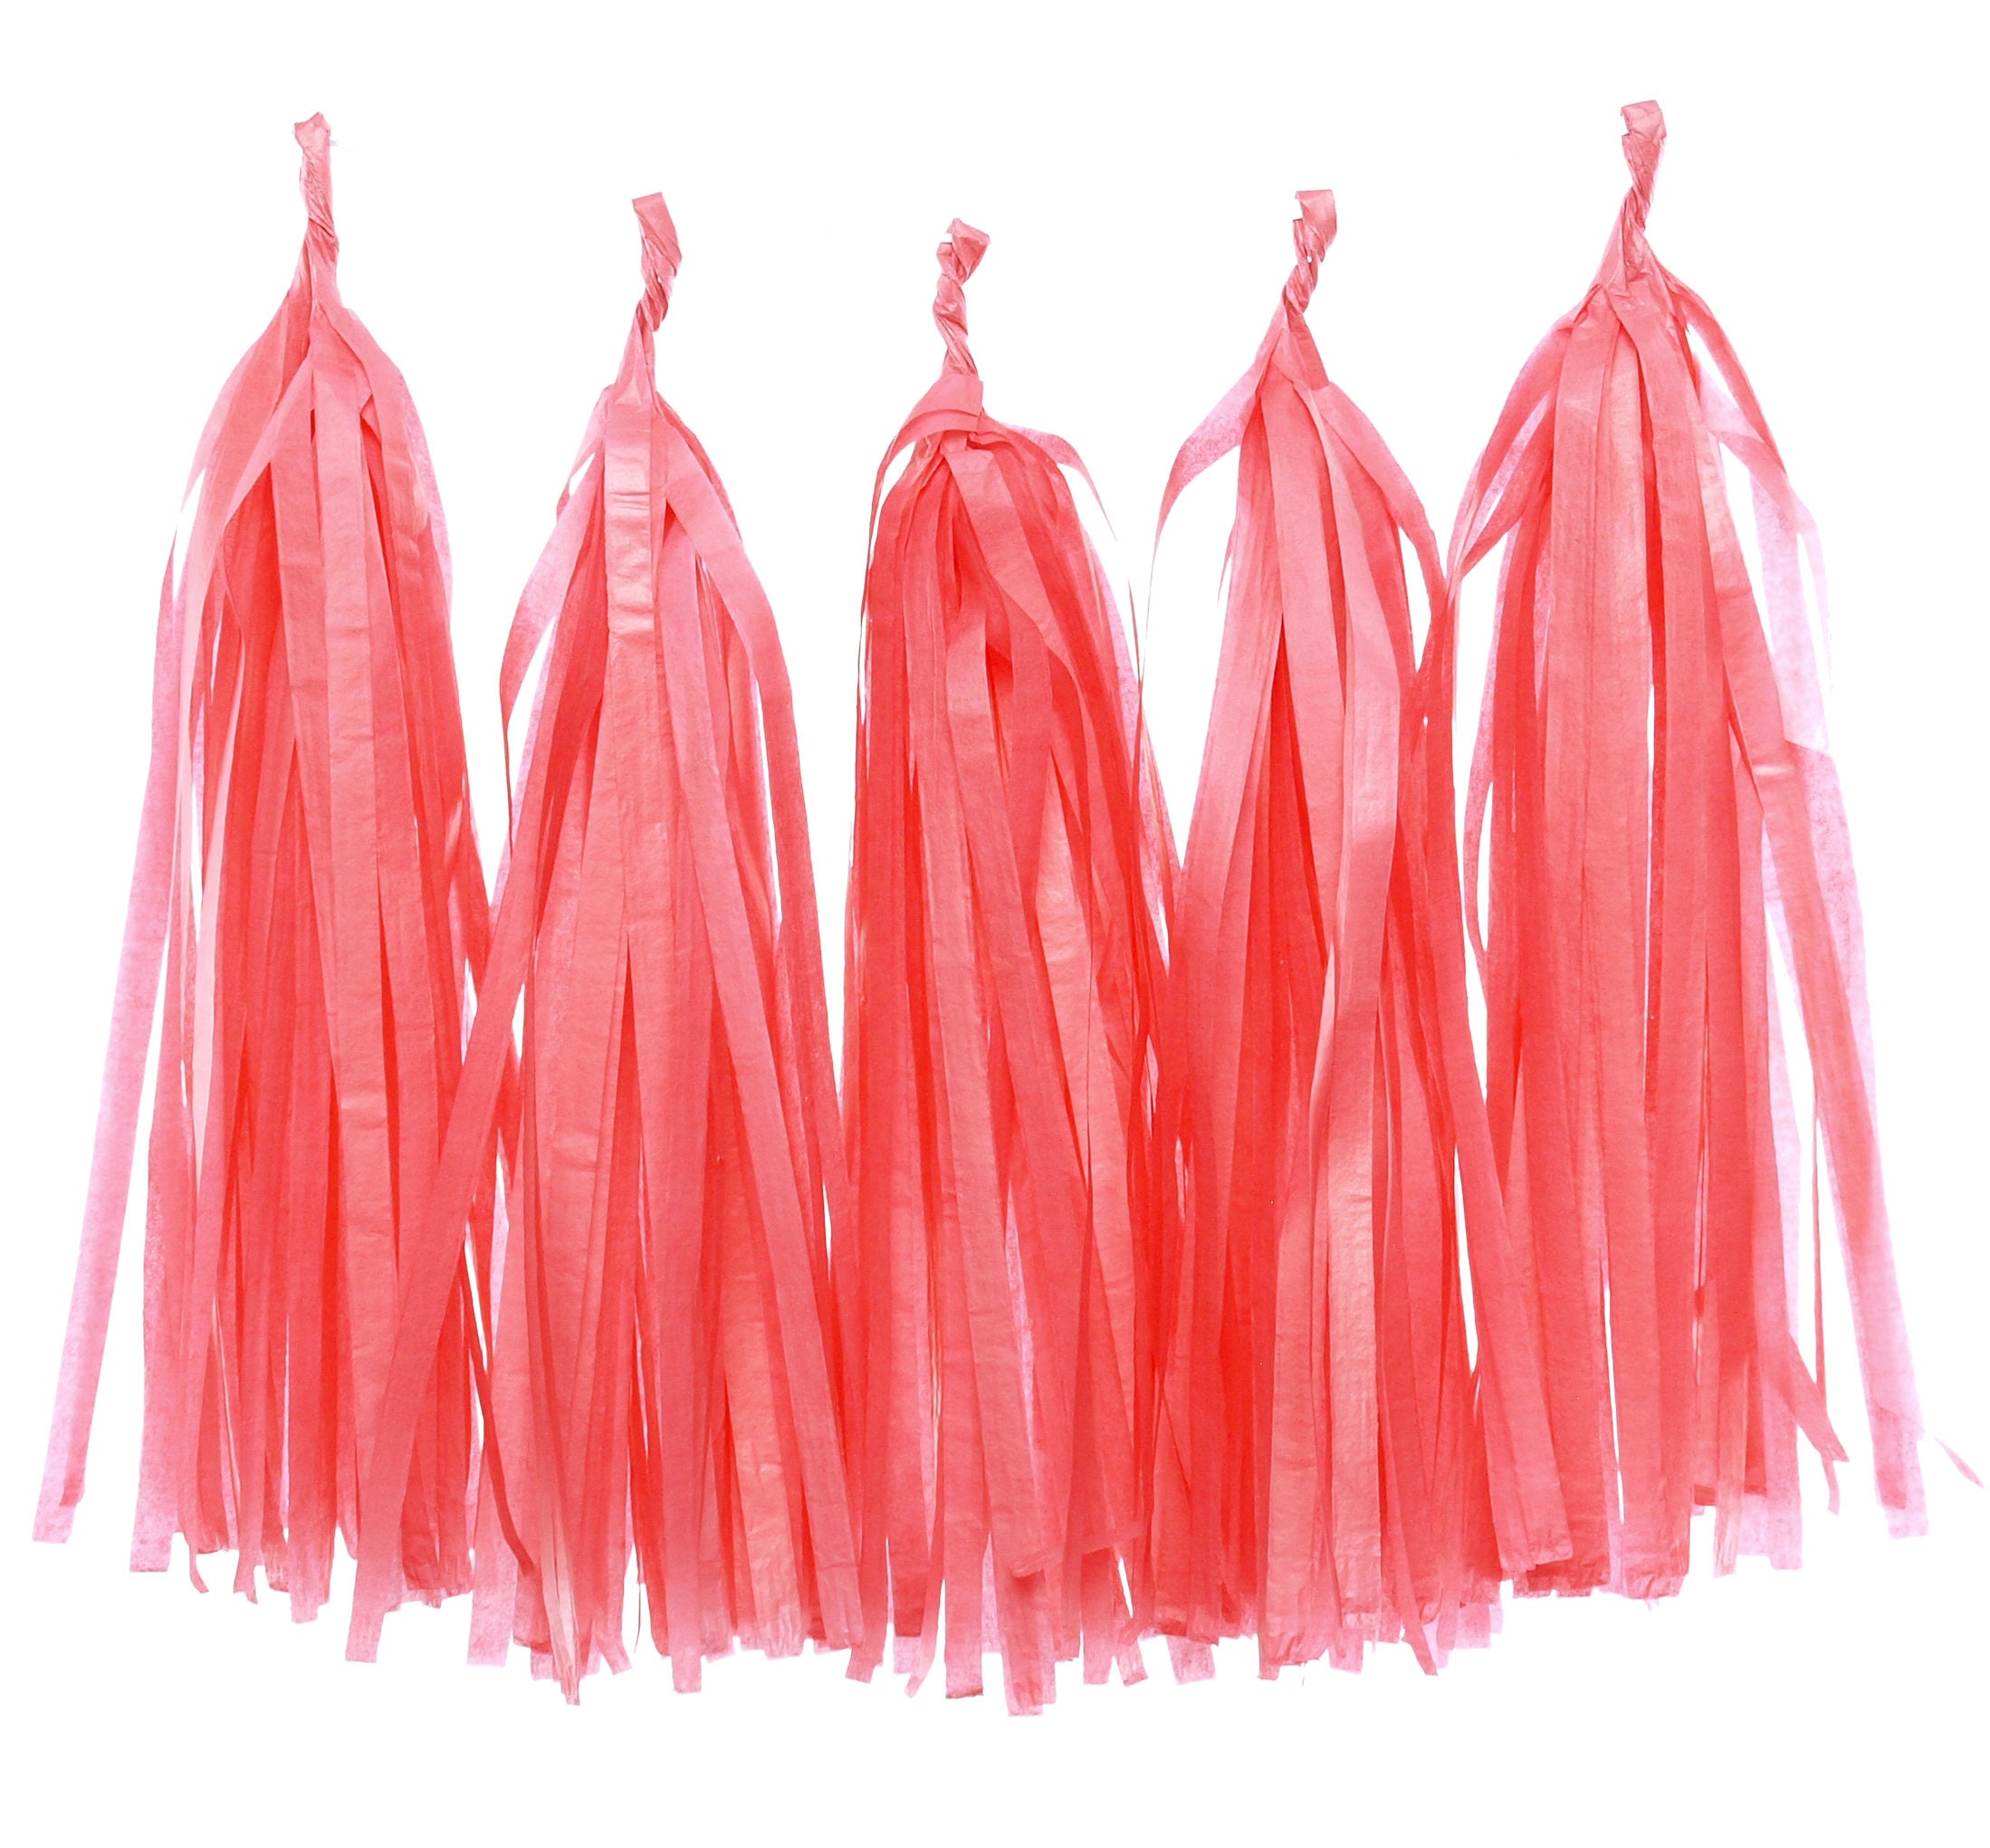 Pink Tassel Garland for Childrens Birthday Party Food Supplies Kids  Children's Party Garland Party Decorations Celebration Kit Coral Pastel